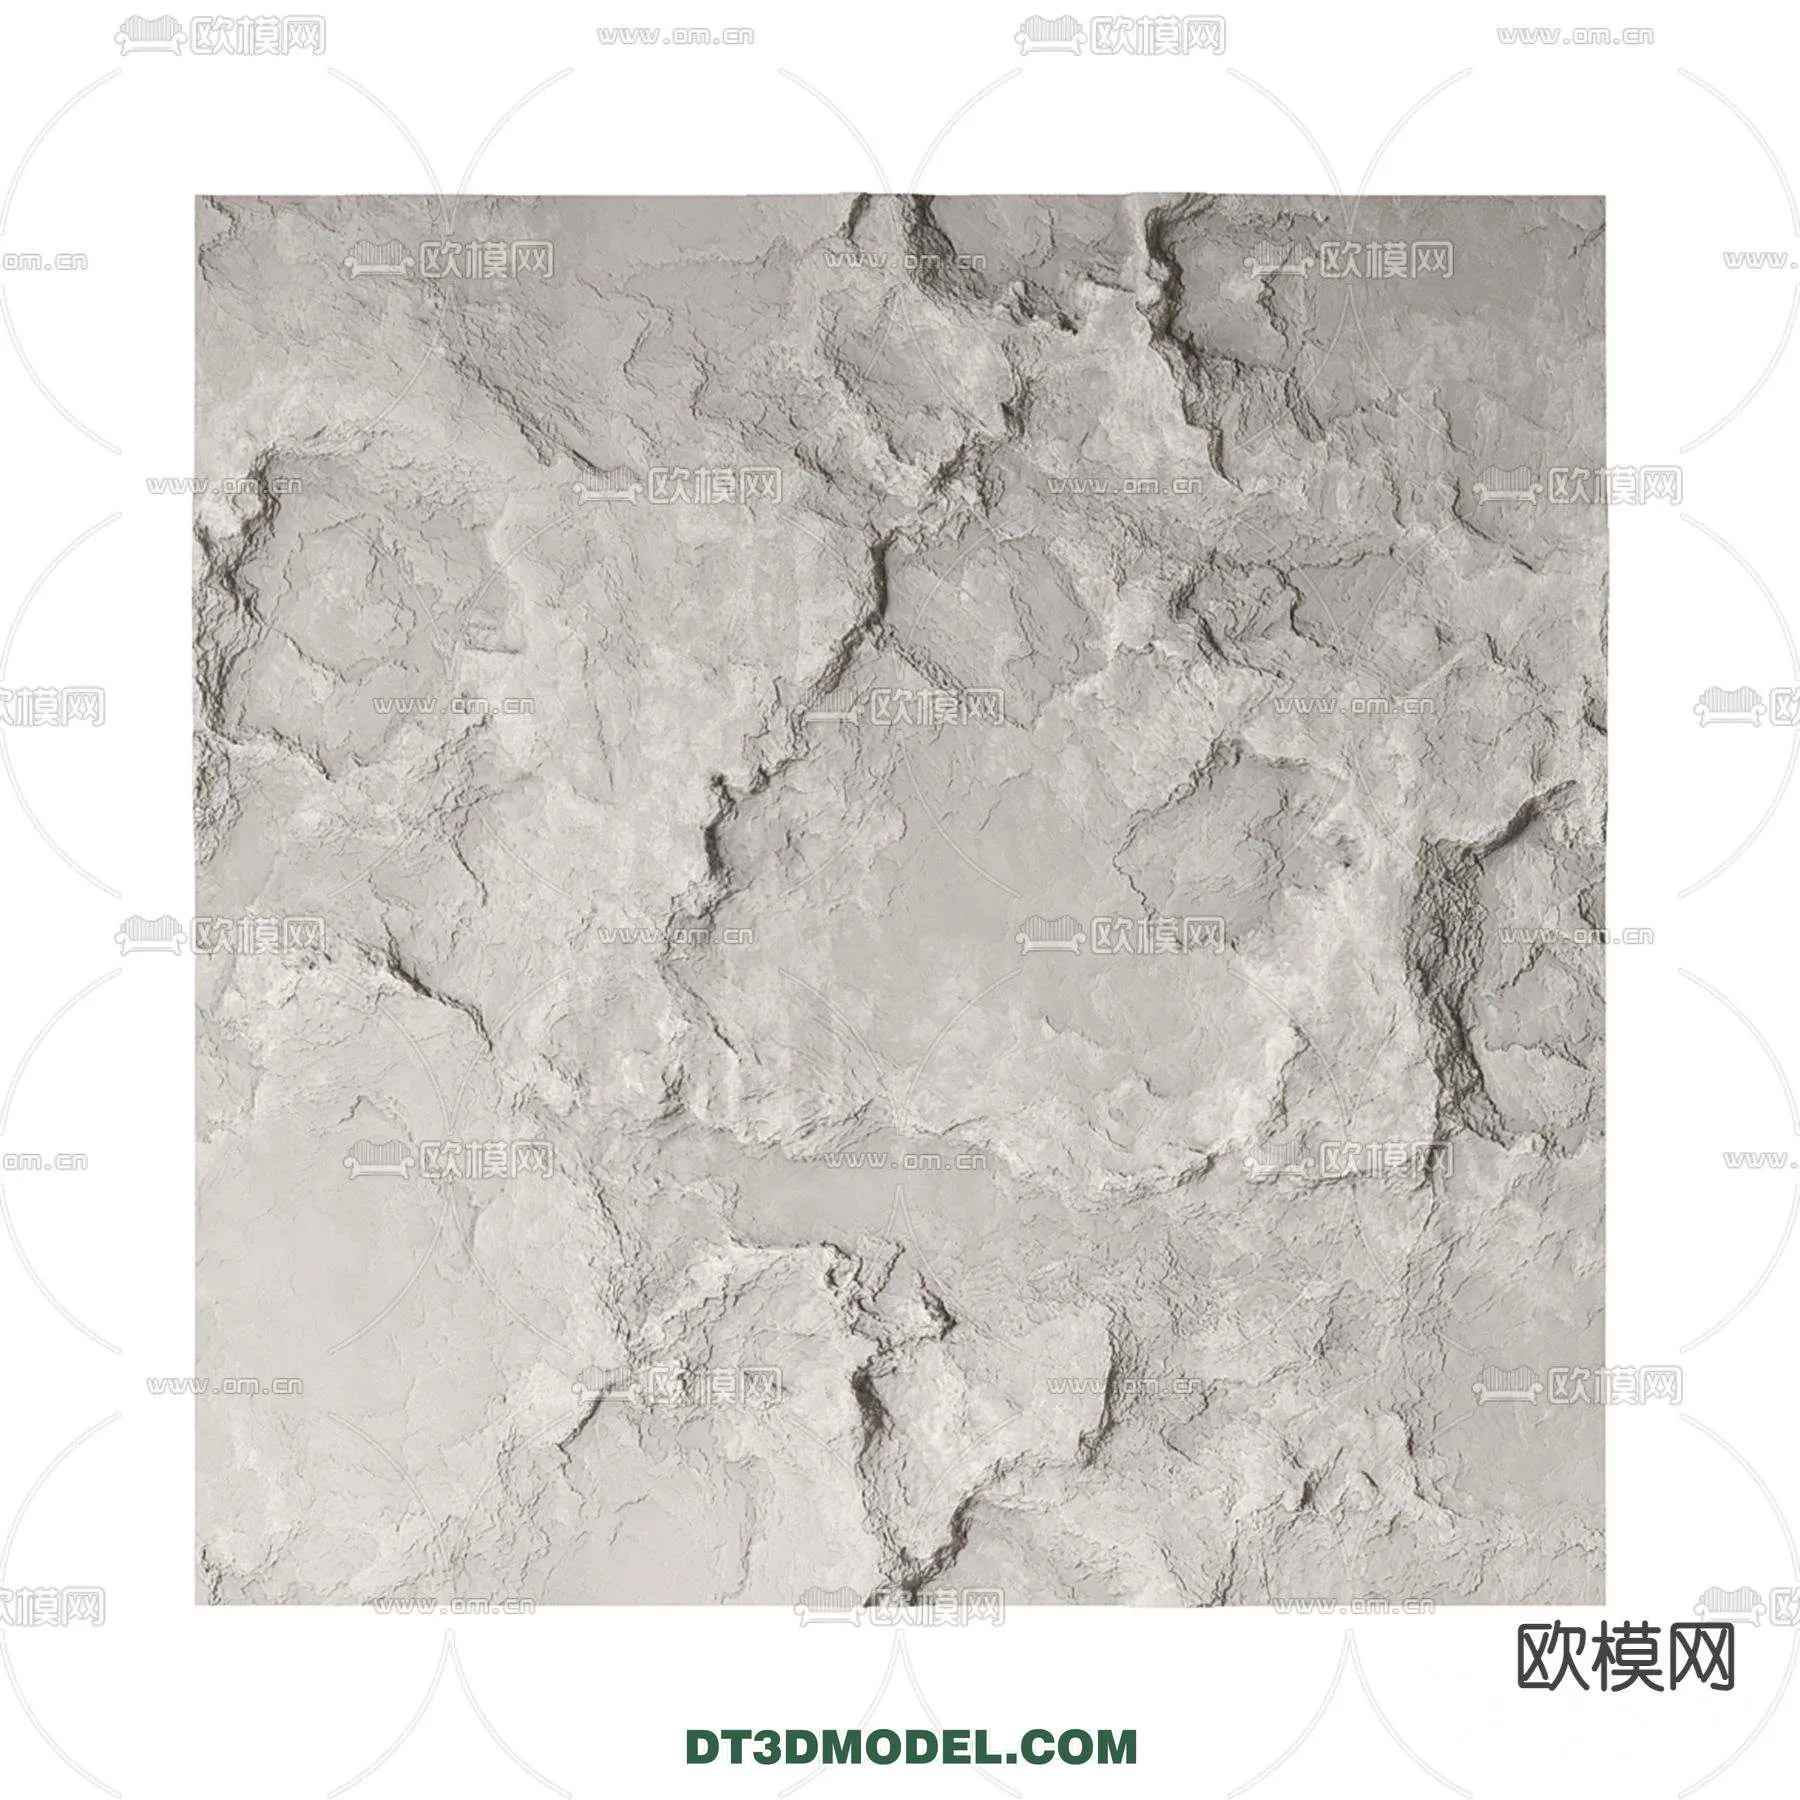 MATERIAL – TEXTURES – ROCK WALL – 0075